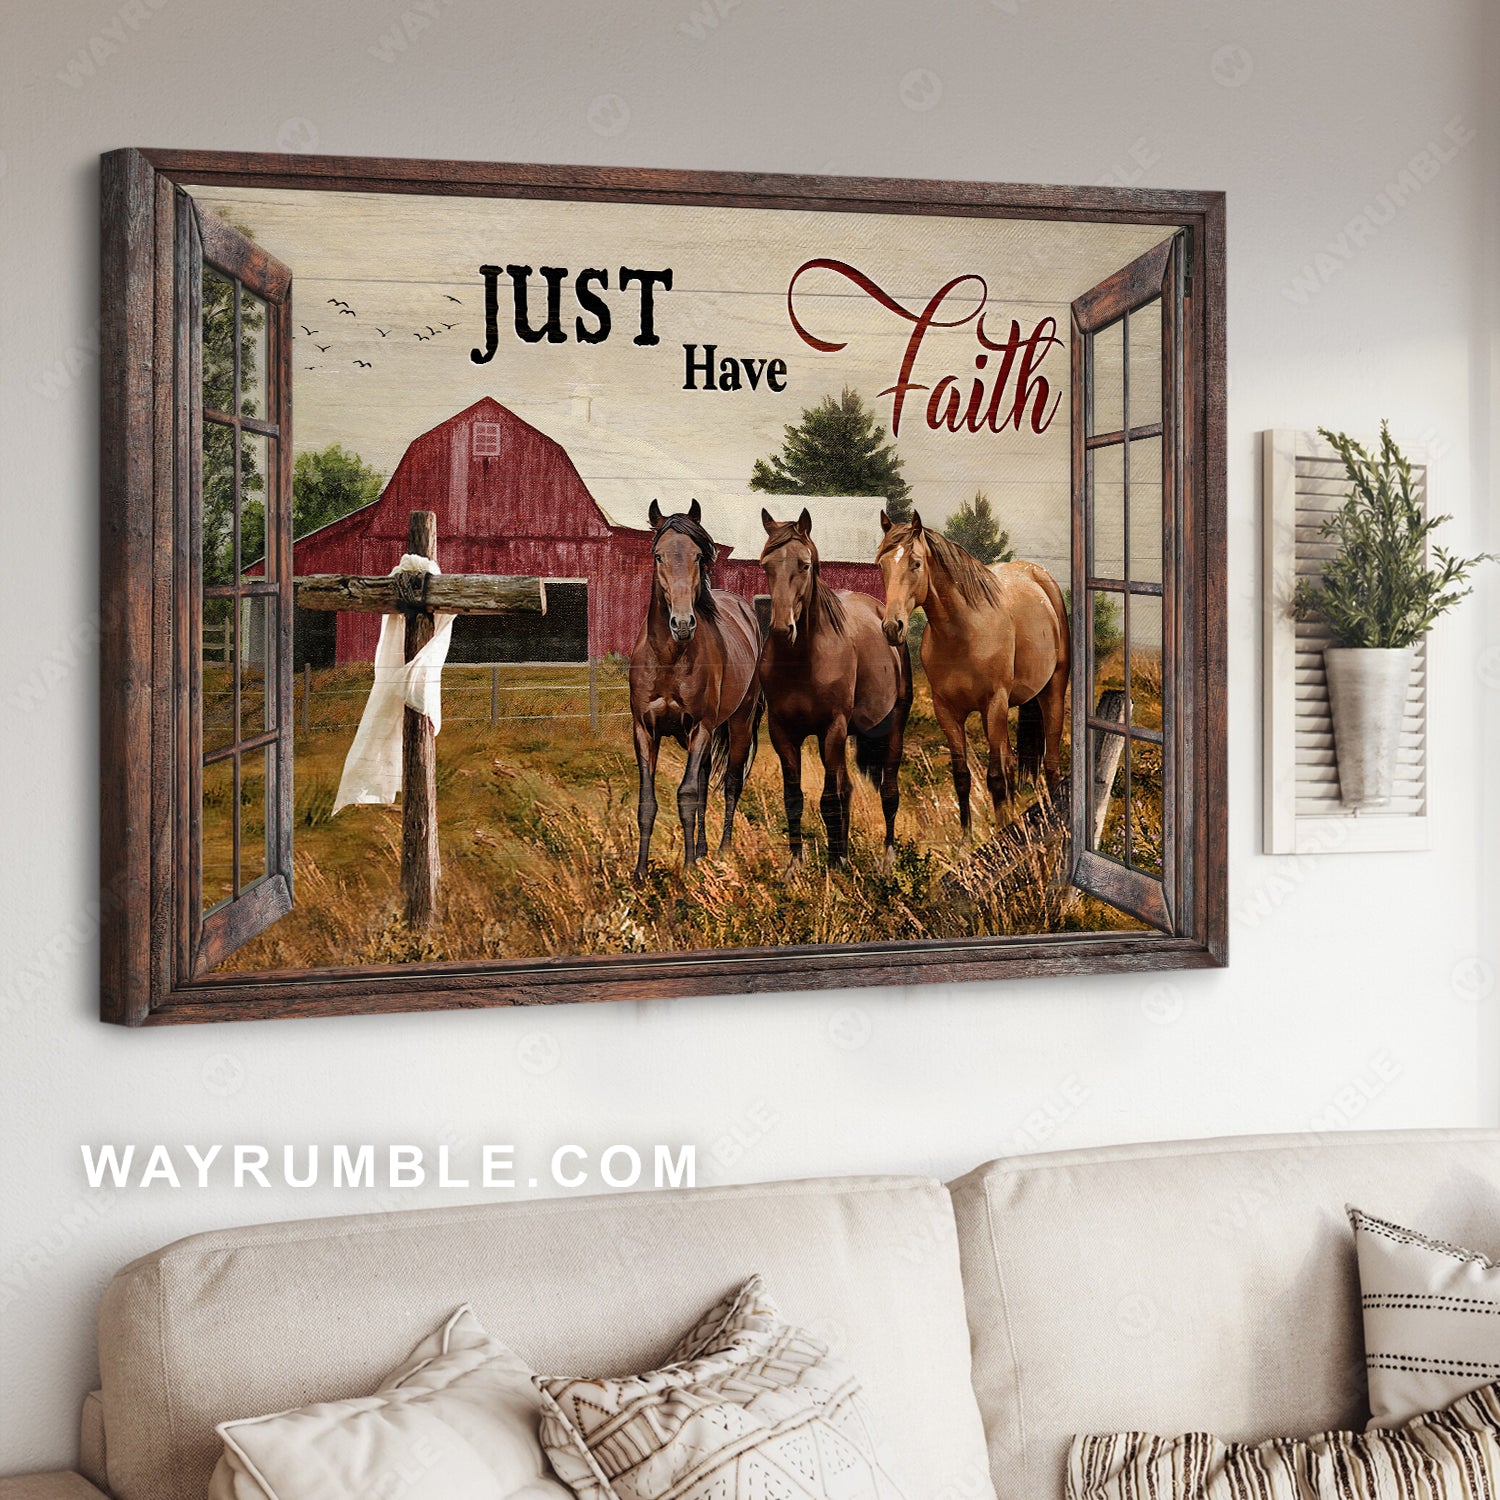 Brown horse, Old barn, Rice field, Just have faith - Jesus Landscape Canvas Prints, Christian Wall Art